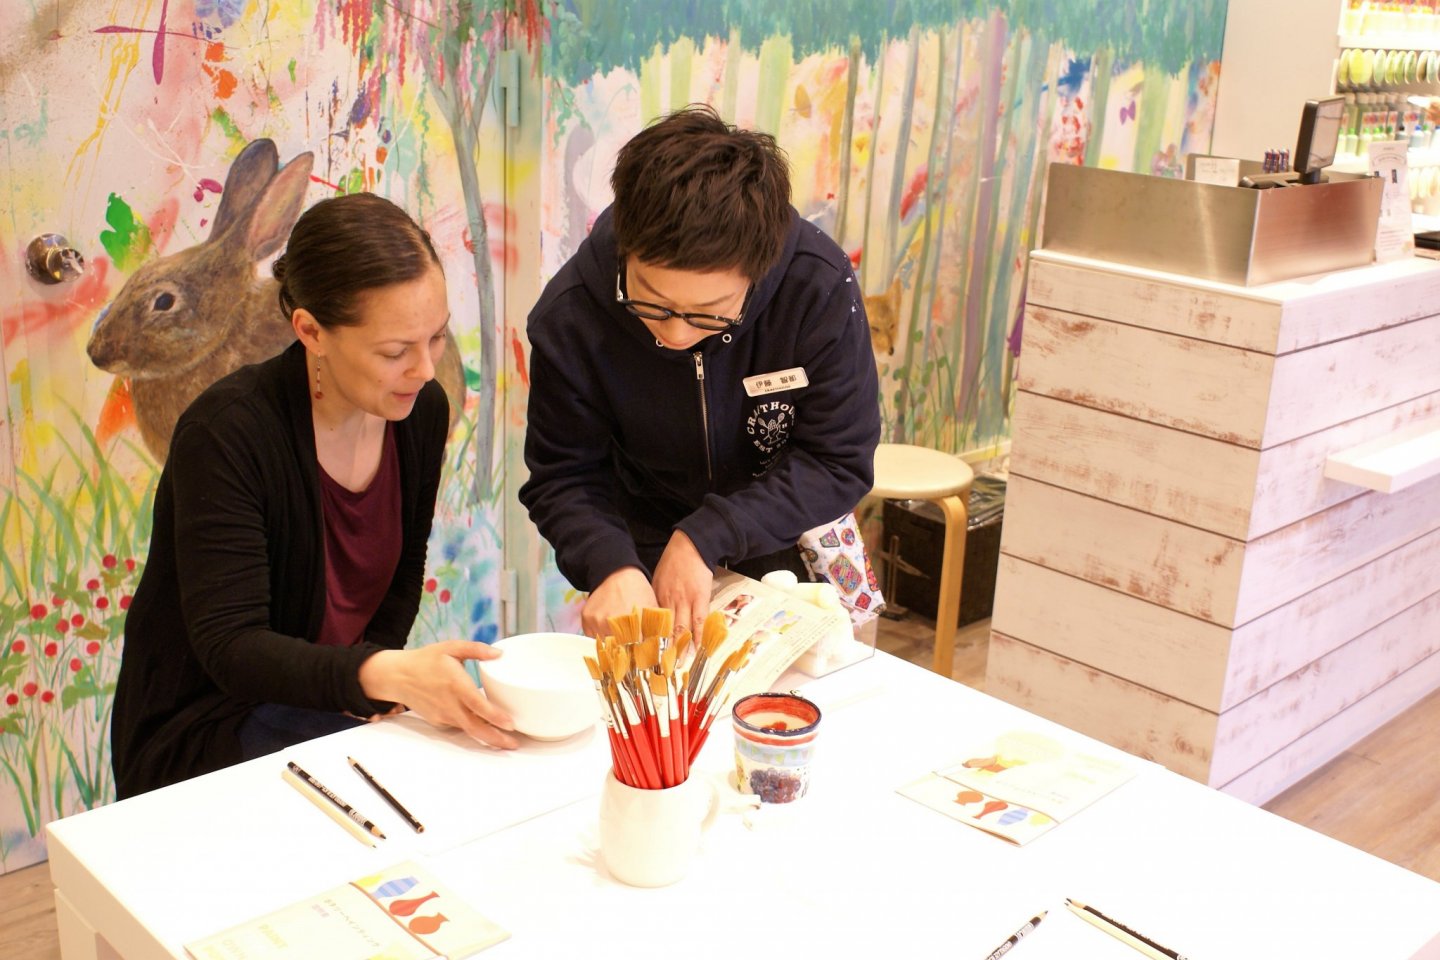 Hakone Crafthouse staff will gladly show you all the materials needed for a painting project